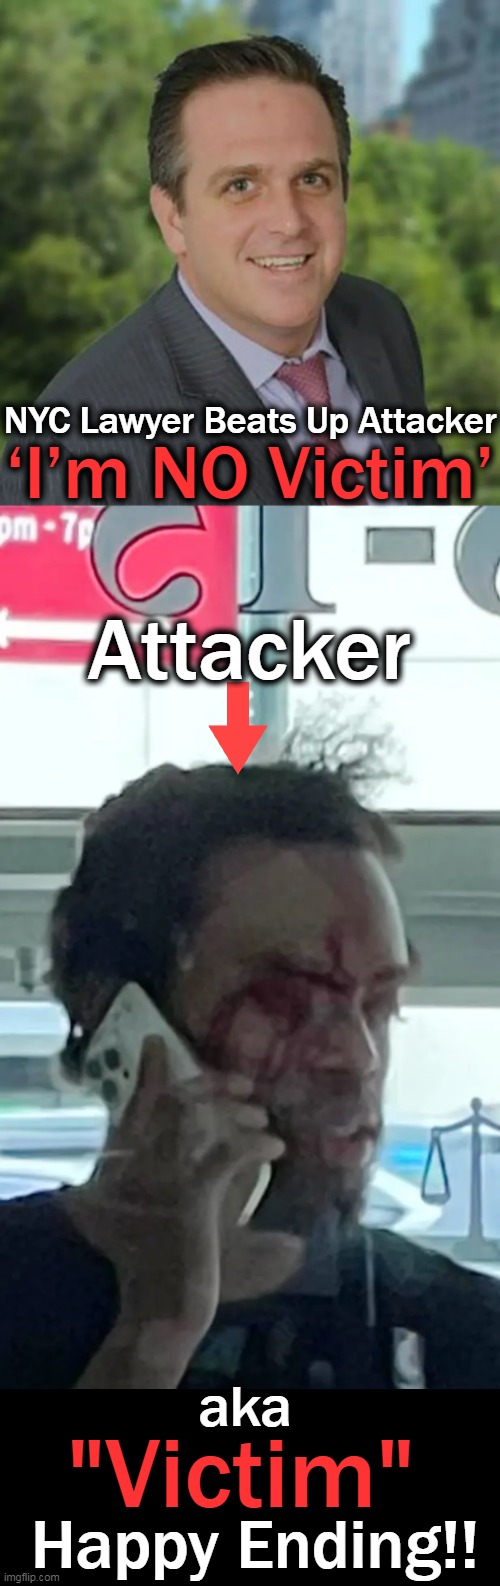 Americans Aren't Victims & Need to FIGHT BACK Against Democrats' Annihilation of LAW & ORDER | NYC Lawyer Beats Up Attacker; ‘I’m NO Victim’; Attacker; aka; "Victim"; Happy Ending!! | image tagged in politics,democrats,victims,law and order,take back our streets,criminals belong in jail | made w/ Imgflip meme maker